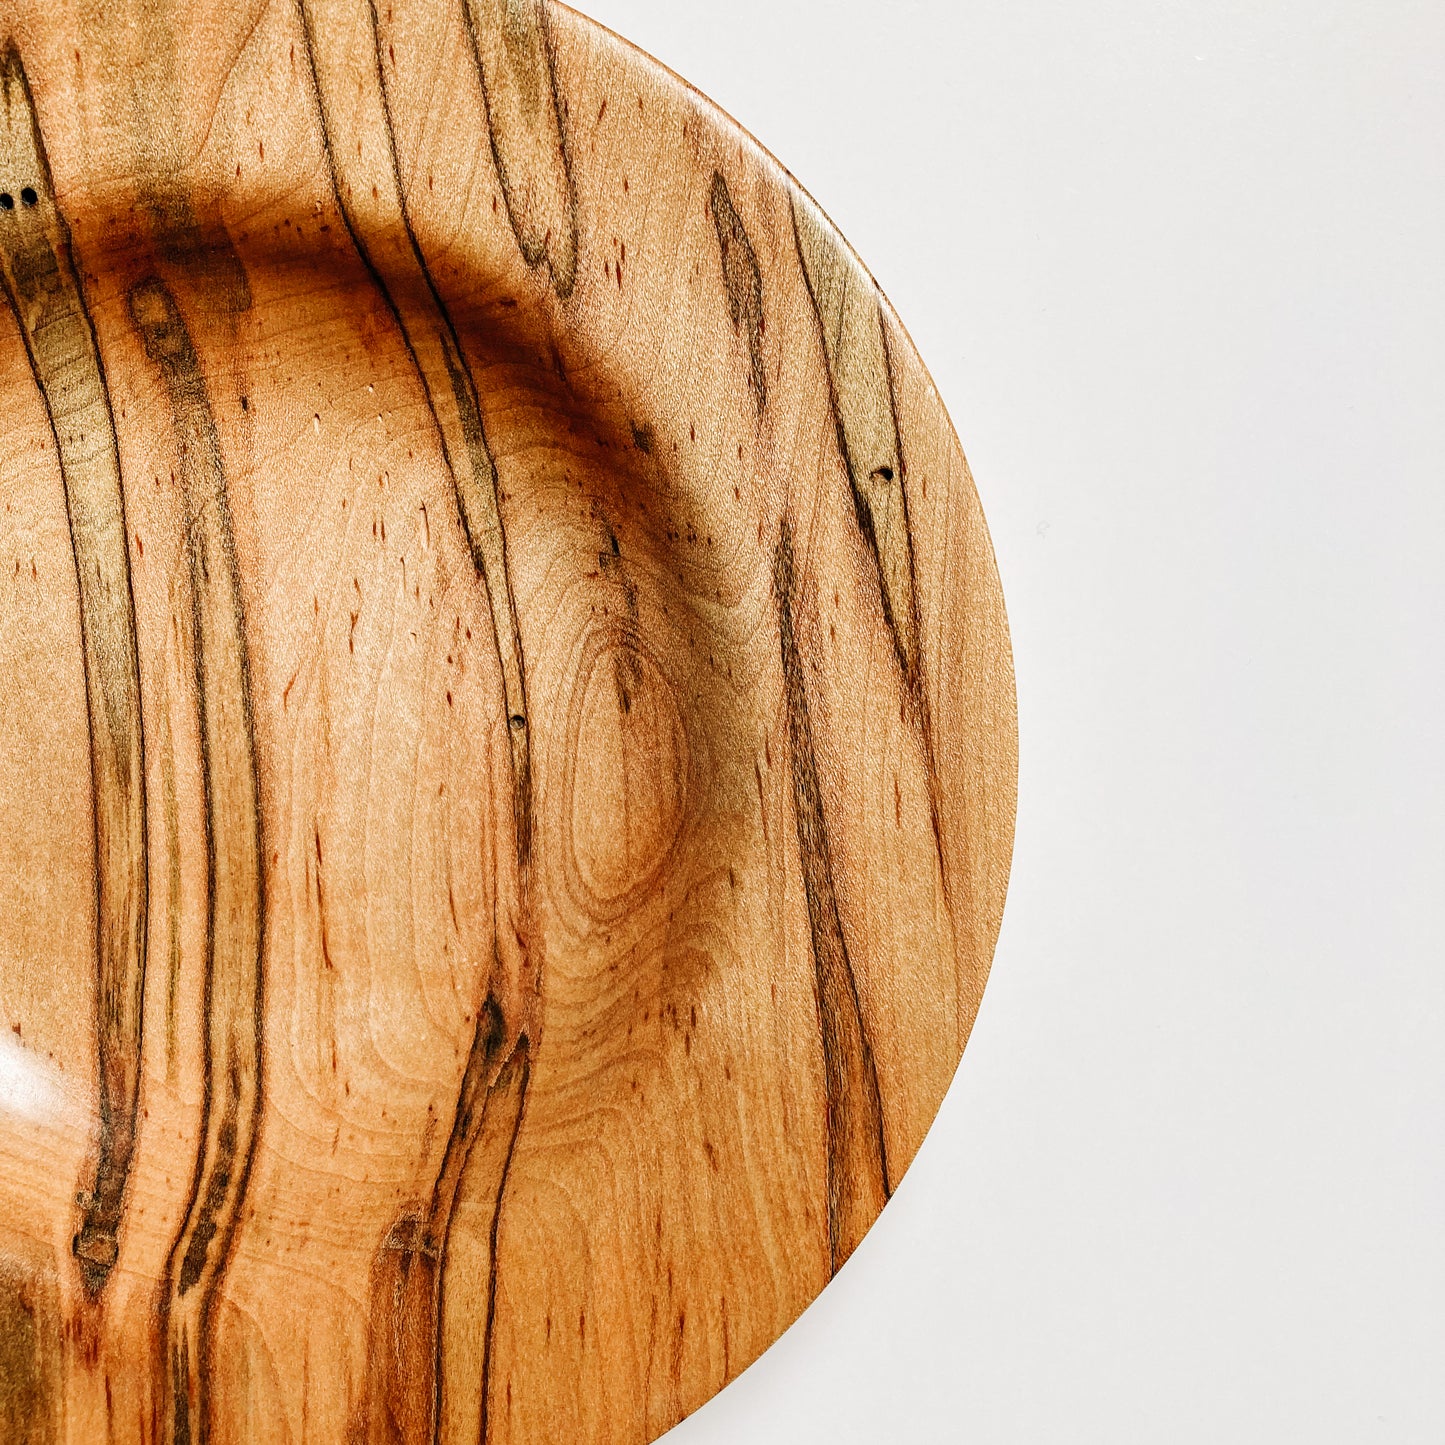 Ambrosia Maple Wooden Carved Bowl - 9 inches by John Parsons Jr. Woodworking